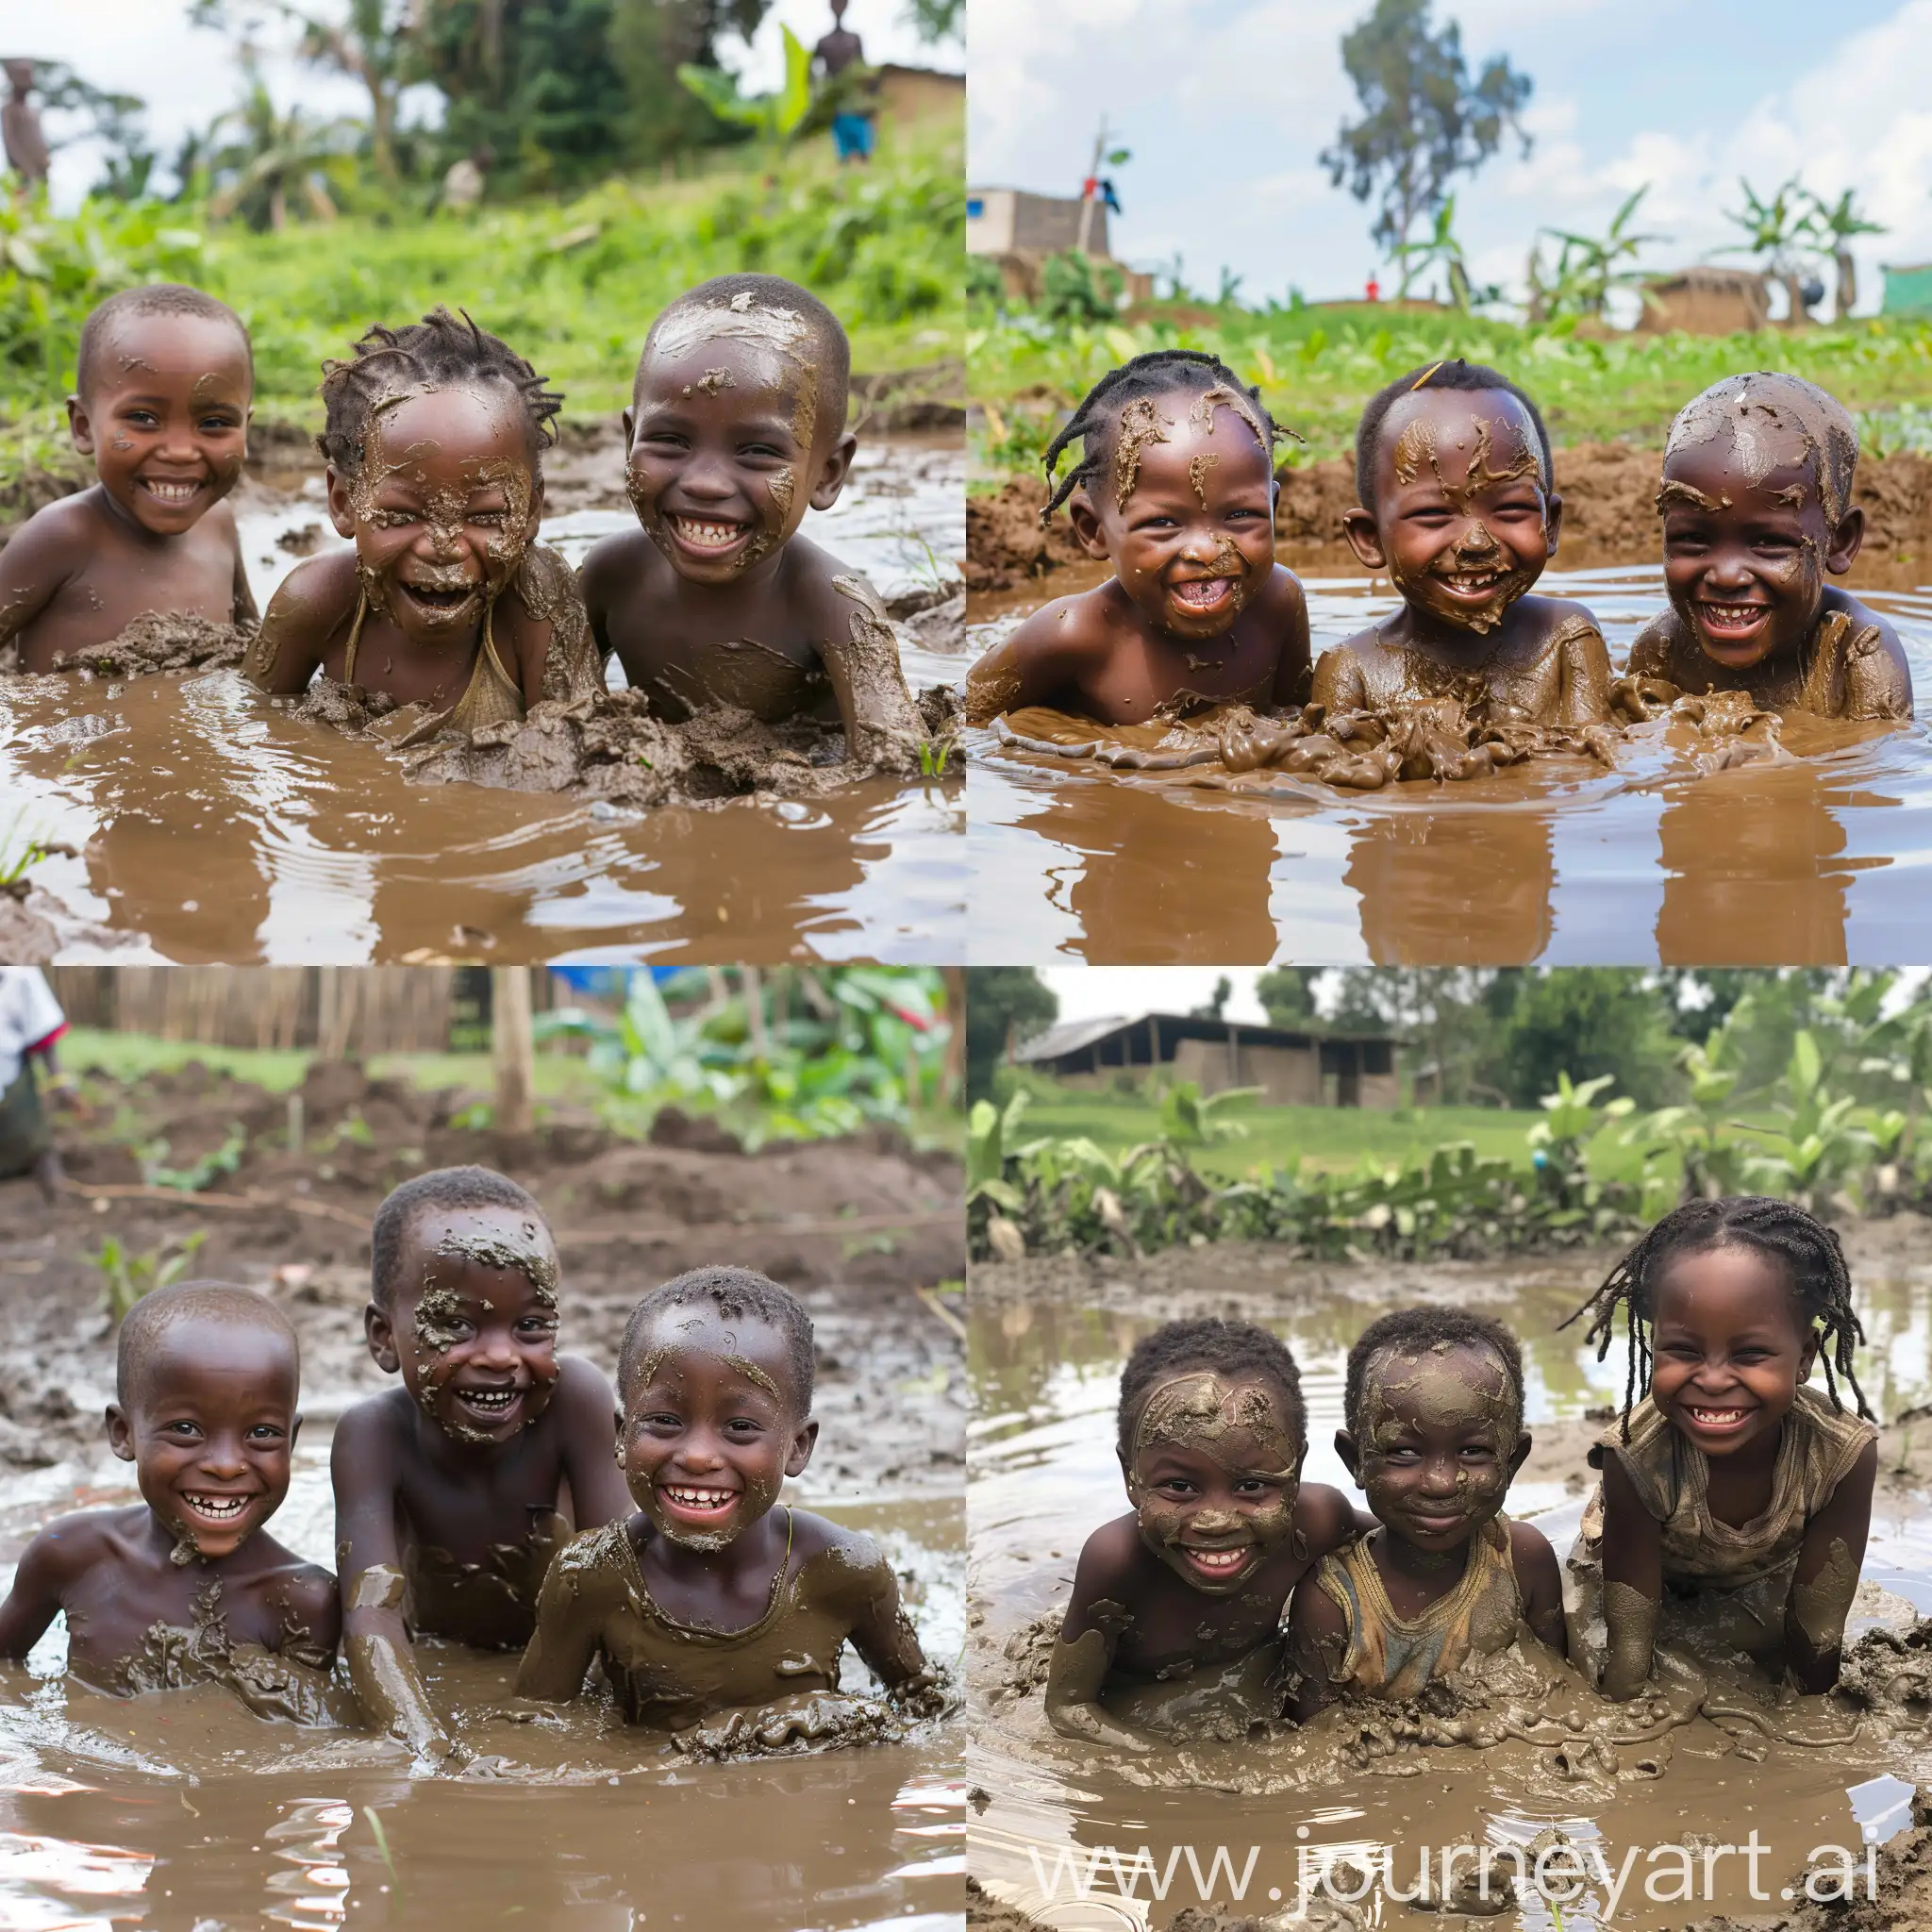 Joyful-African-Children-Playing-in-Mud-Pond-on-Sunny-Day